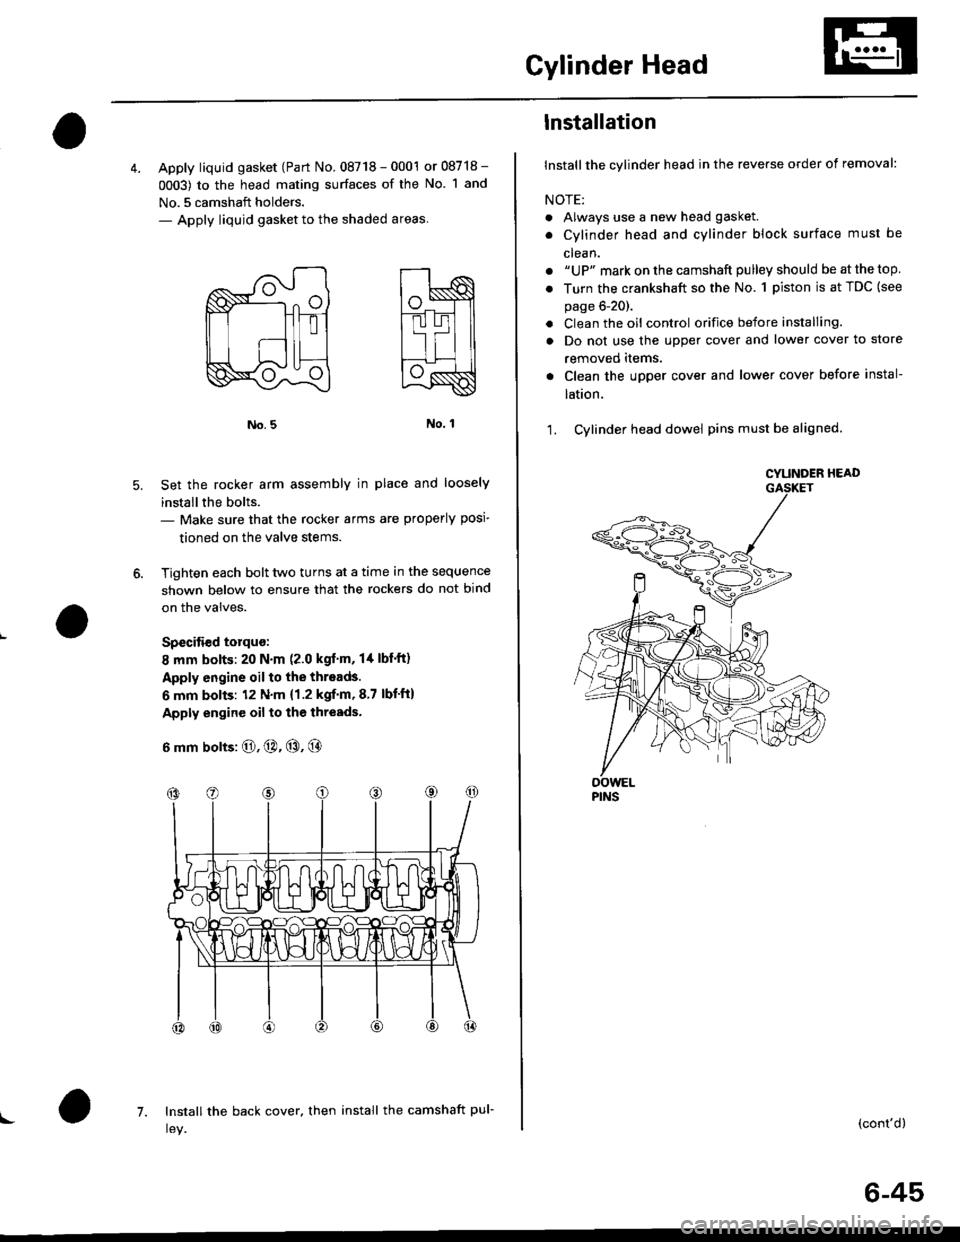 HONDA CIVIC 1997 6.G Workshop Manual Cylinder Head
4. Apply liquid gasket (Part No. 08718 - 0001 or 08718 -
0003) to the head mating surfaces of the No. 1 and
No.5 camshaft holders.- Apply liquid gasket to the shaded areas
Set the rocker